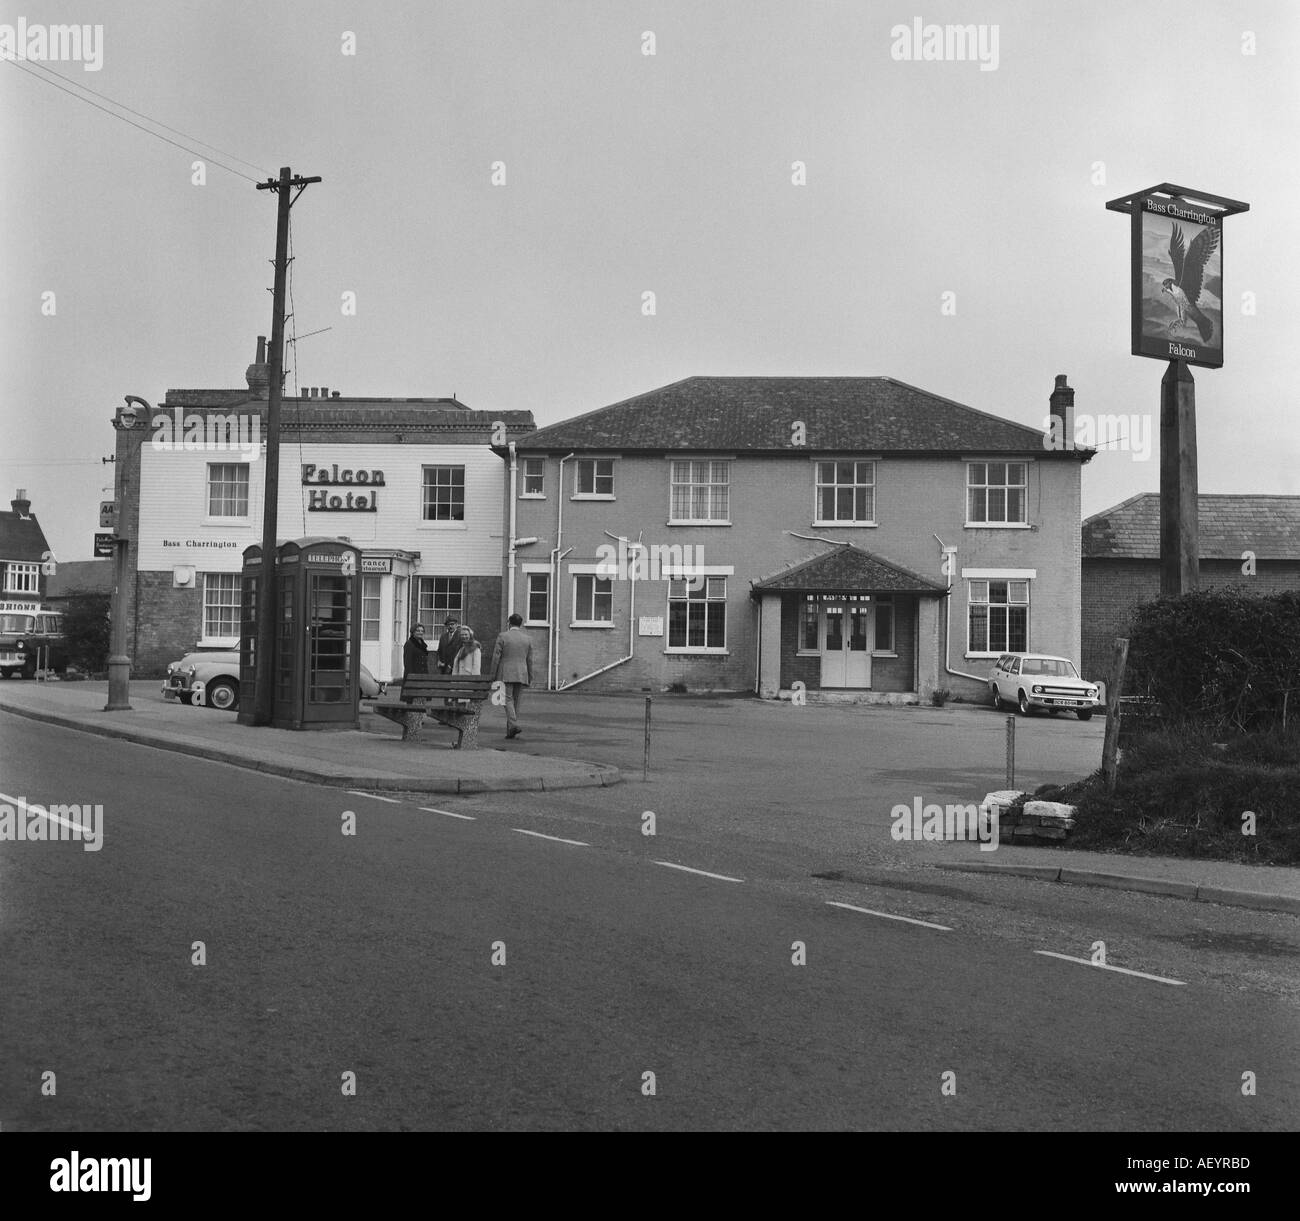 falcon hotel fawley hampshire 1974 in 6x6 number 0063 Stock Photo